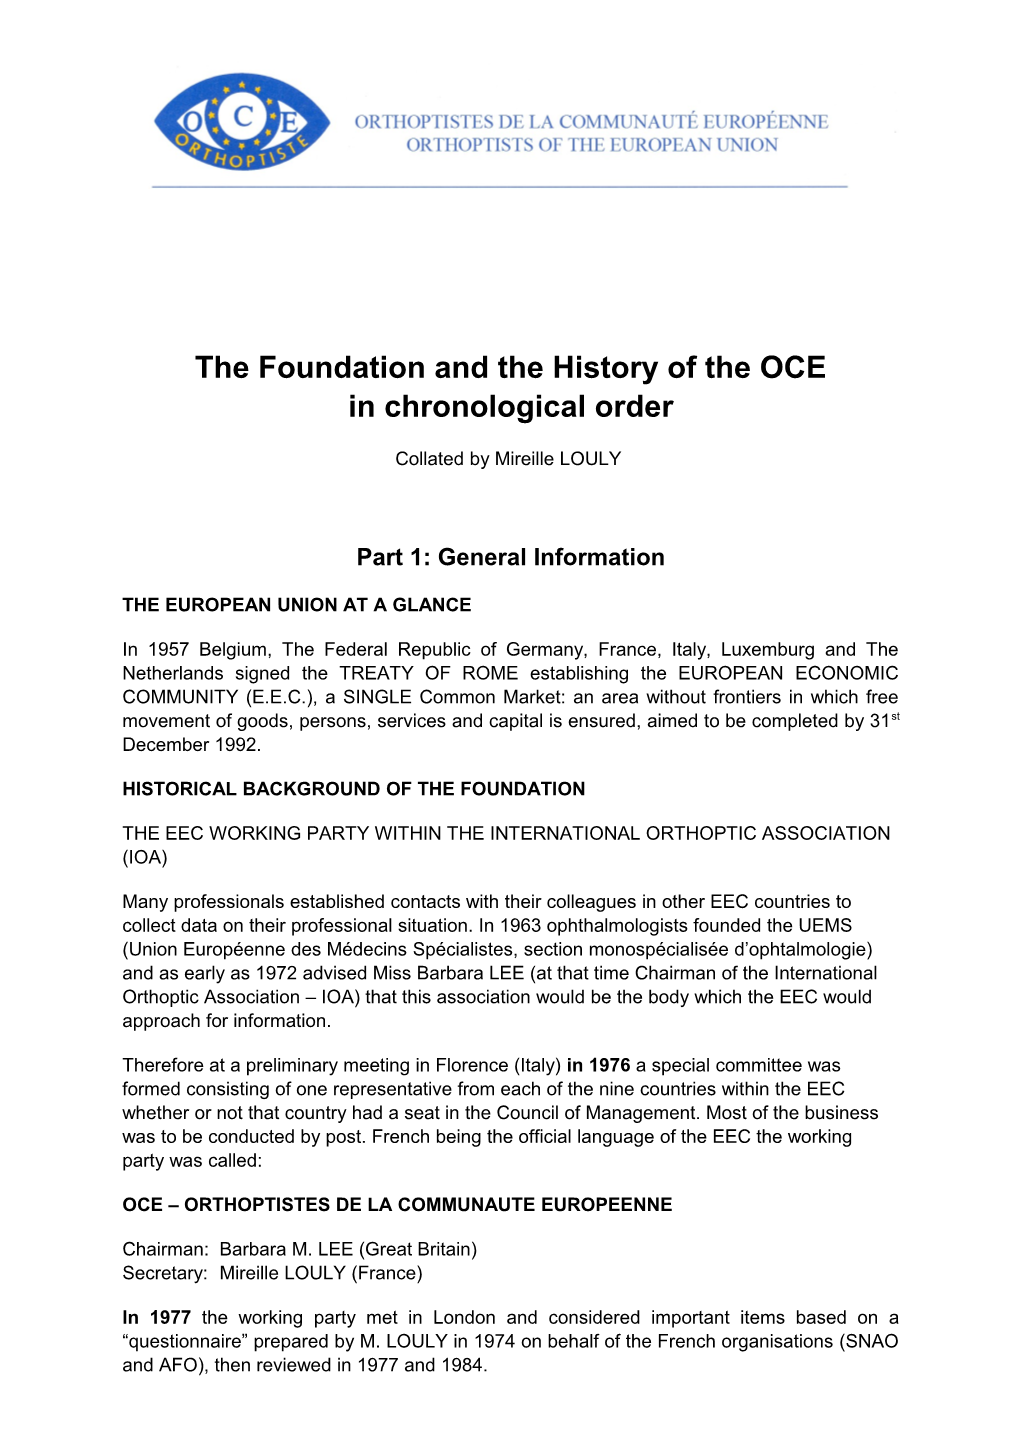 The Foundation and the History of the OCE in Chronological Order